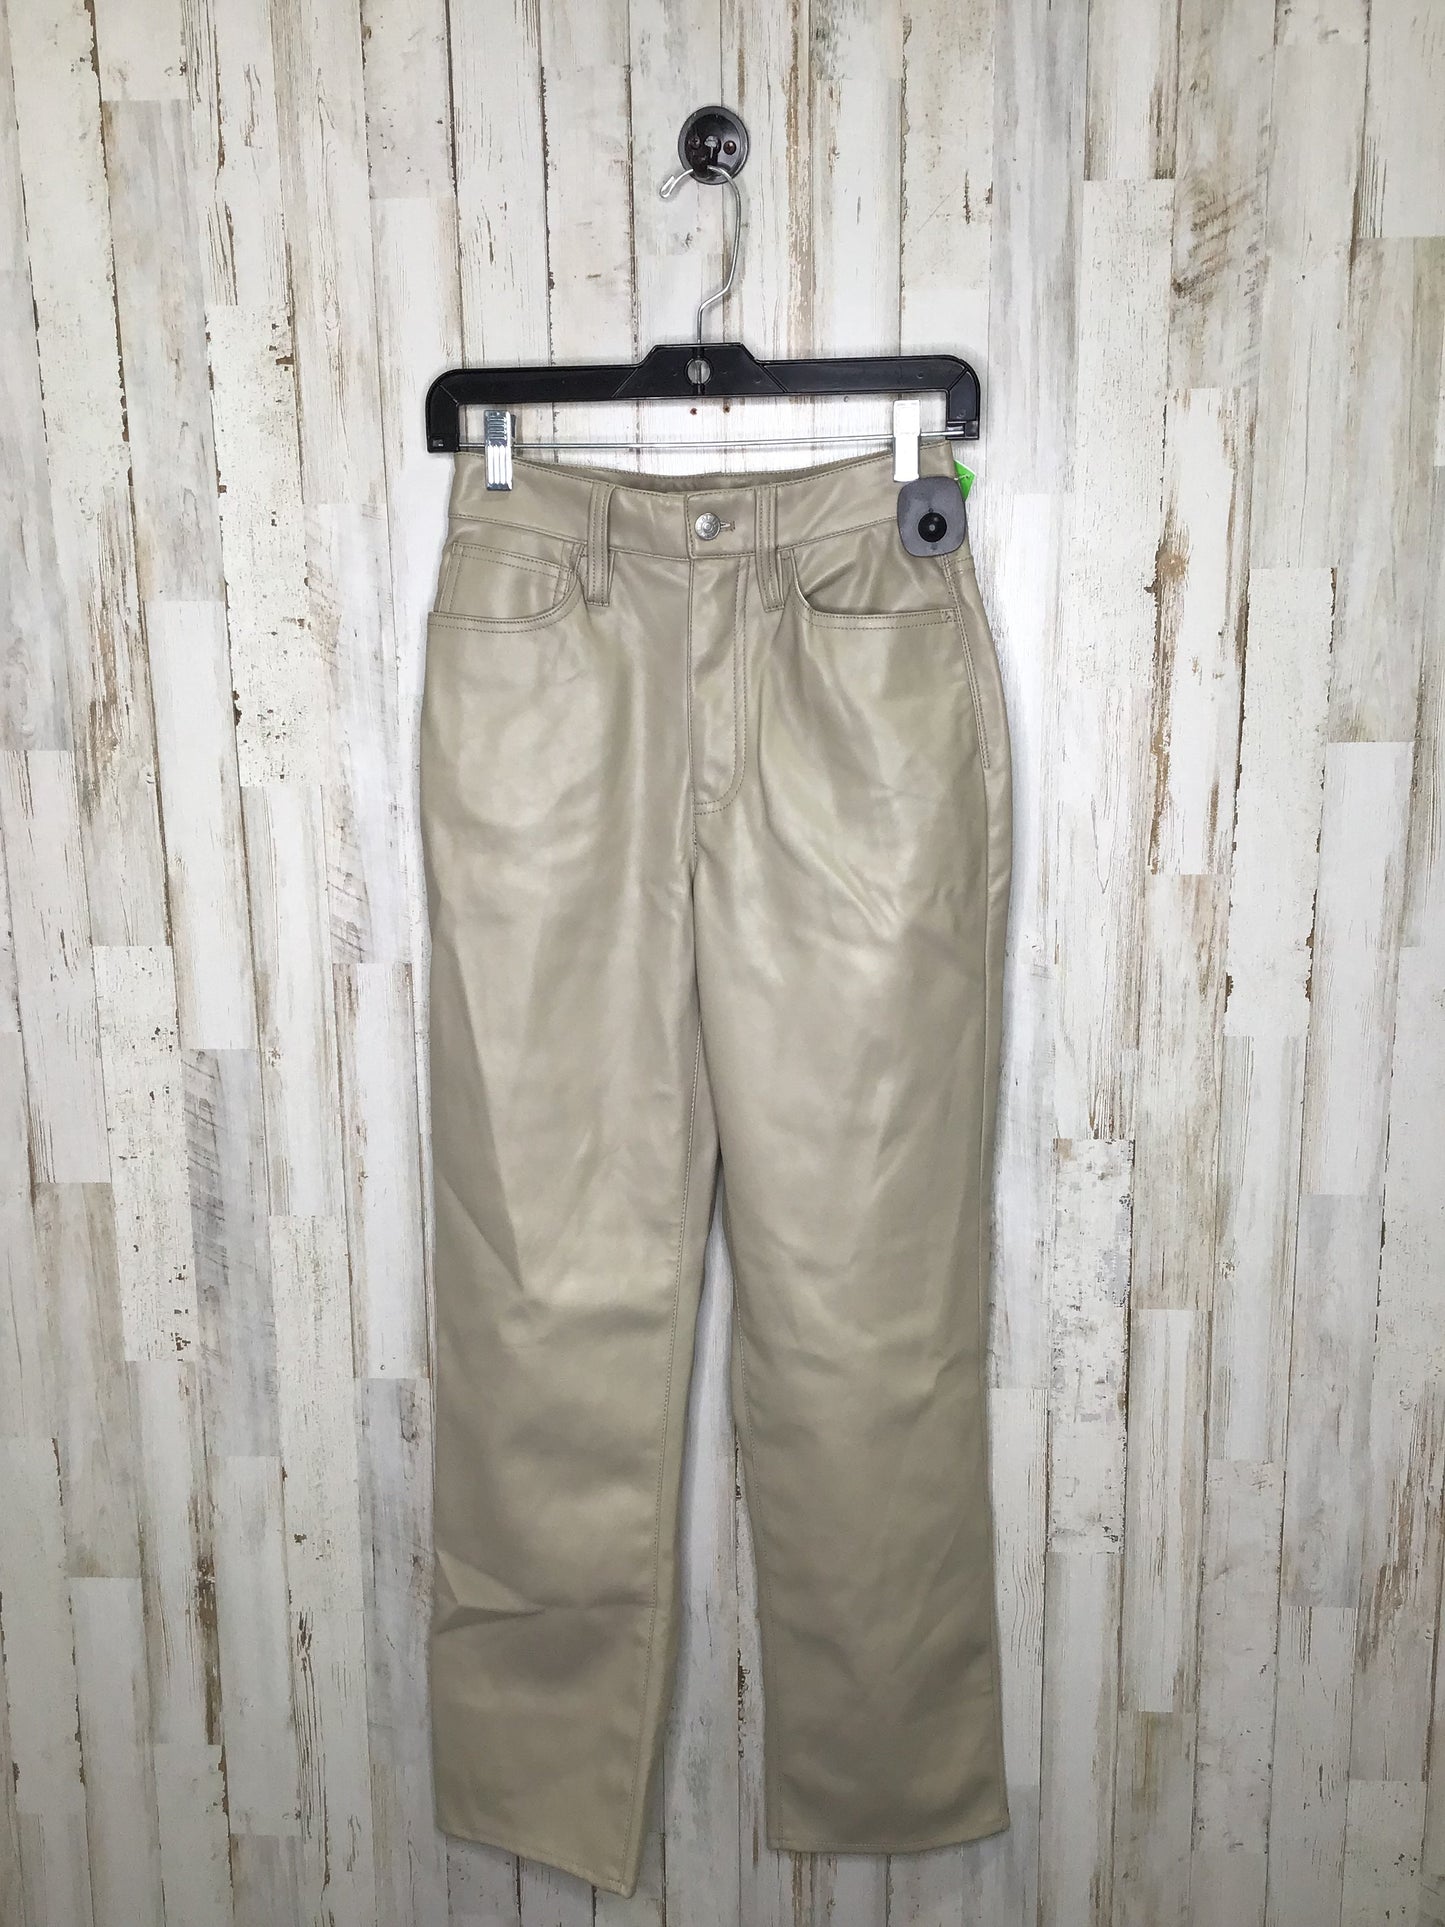 Pants Ankle By Madewell  Size: 0